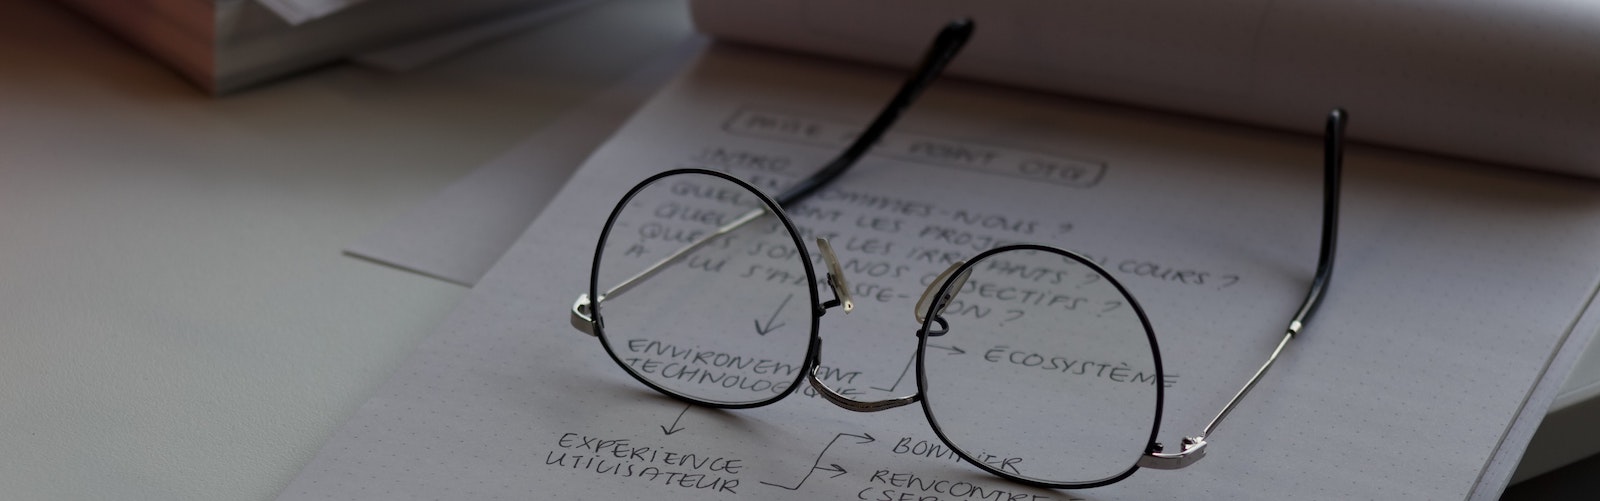 Wireframed Glasses on a pad of paper with french writing on it